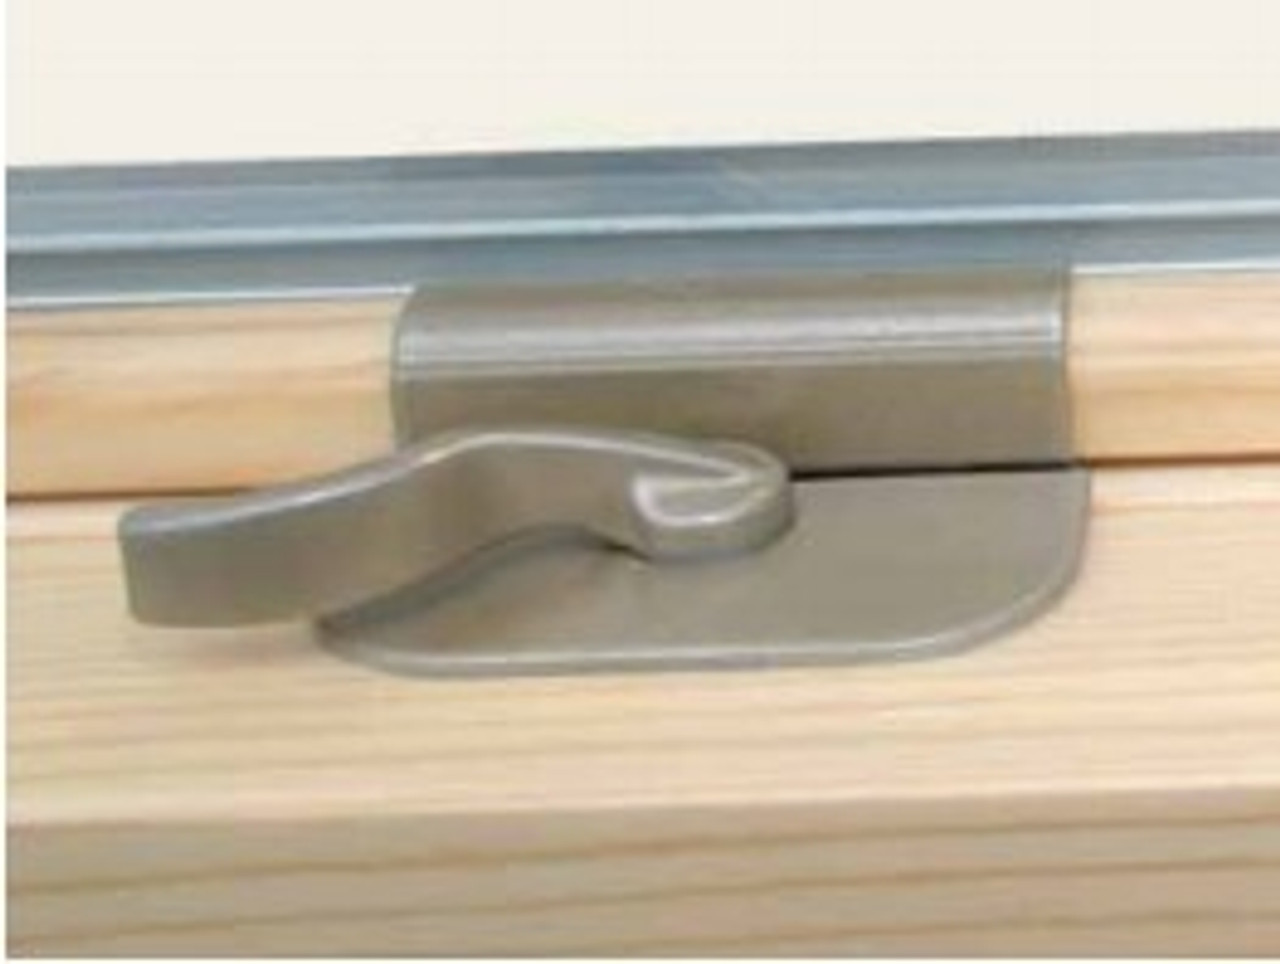 Sash lock (recessed)  with keeper, protector and screws for Lincoln window for units manufactured spring 2004 to present